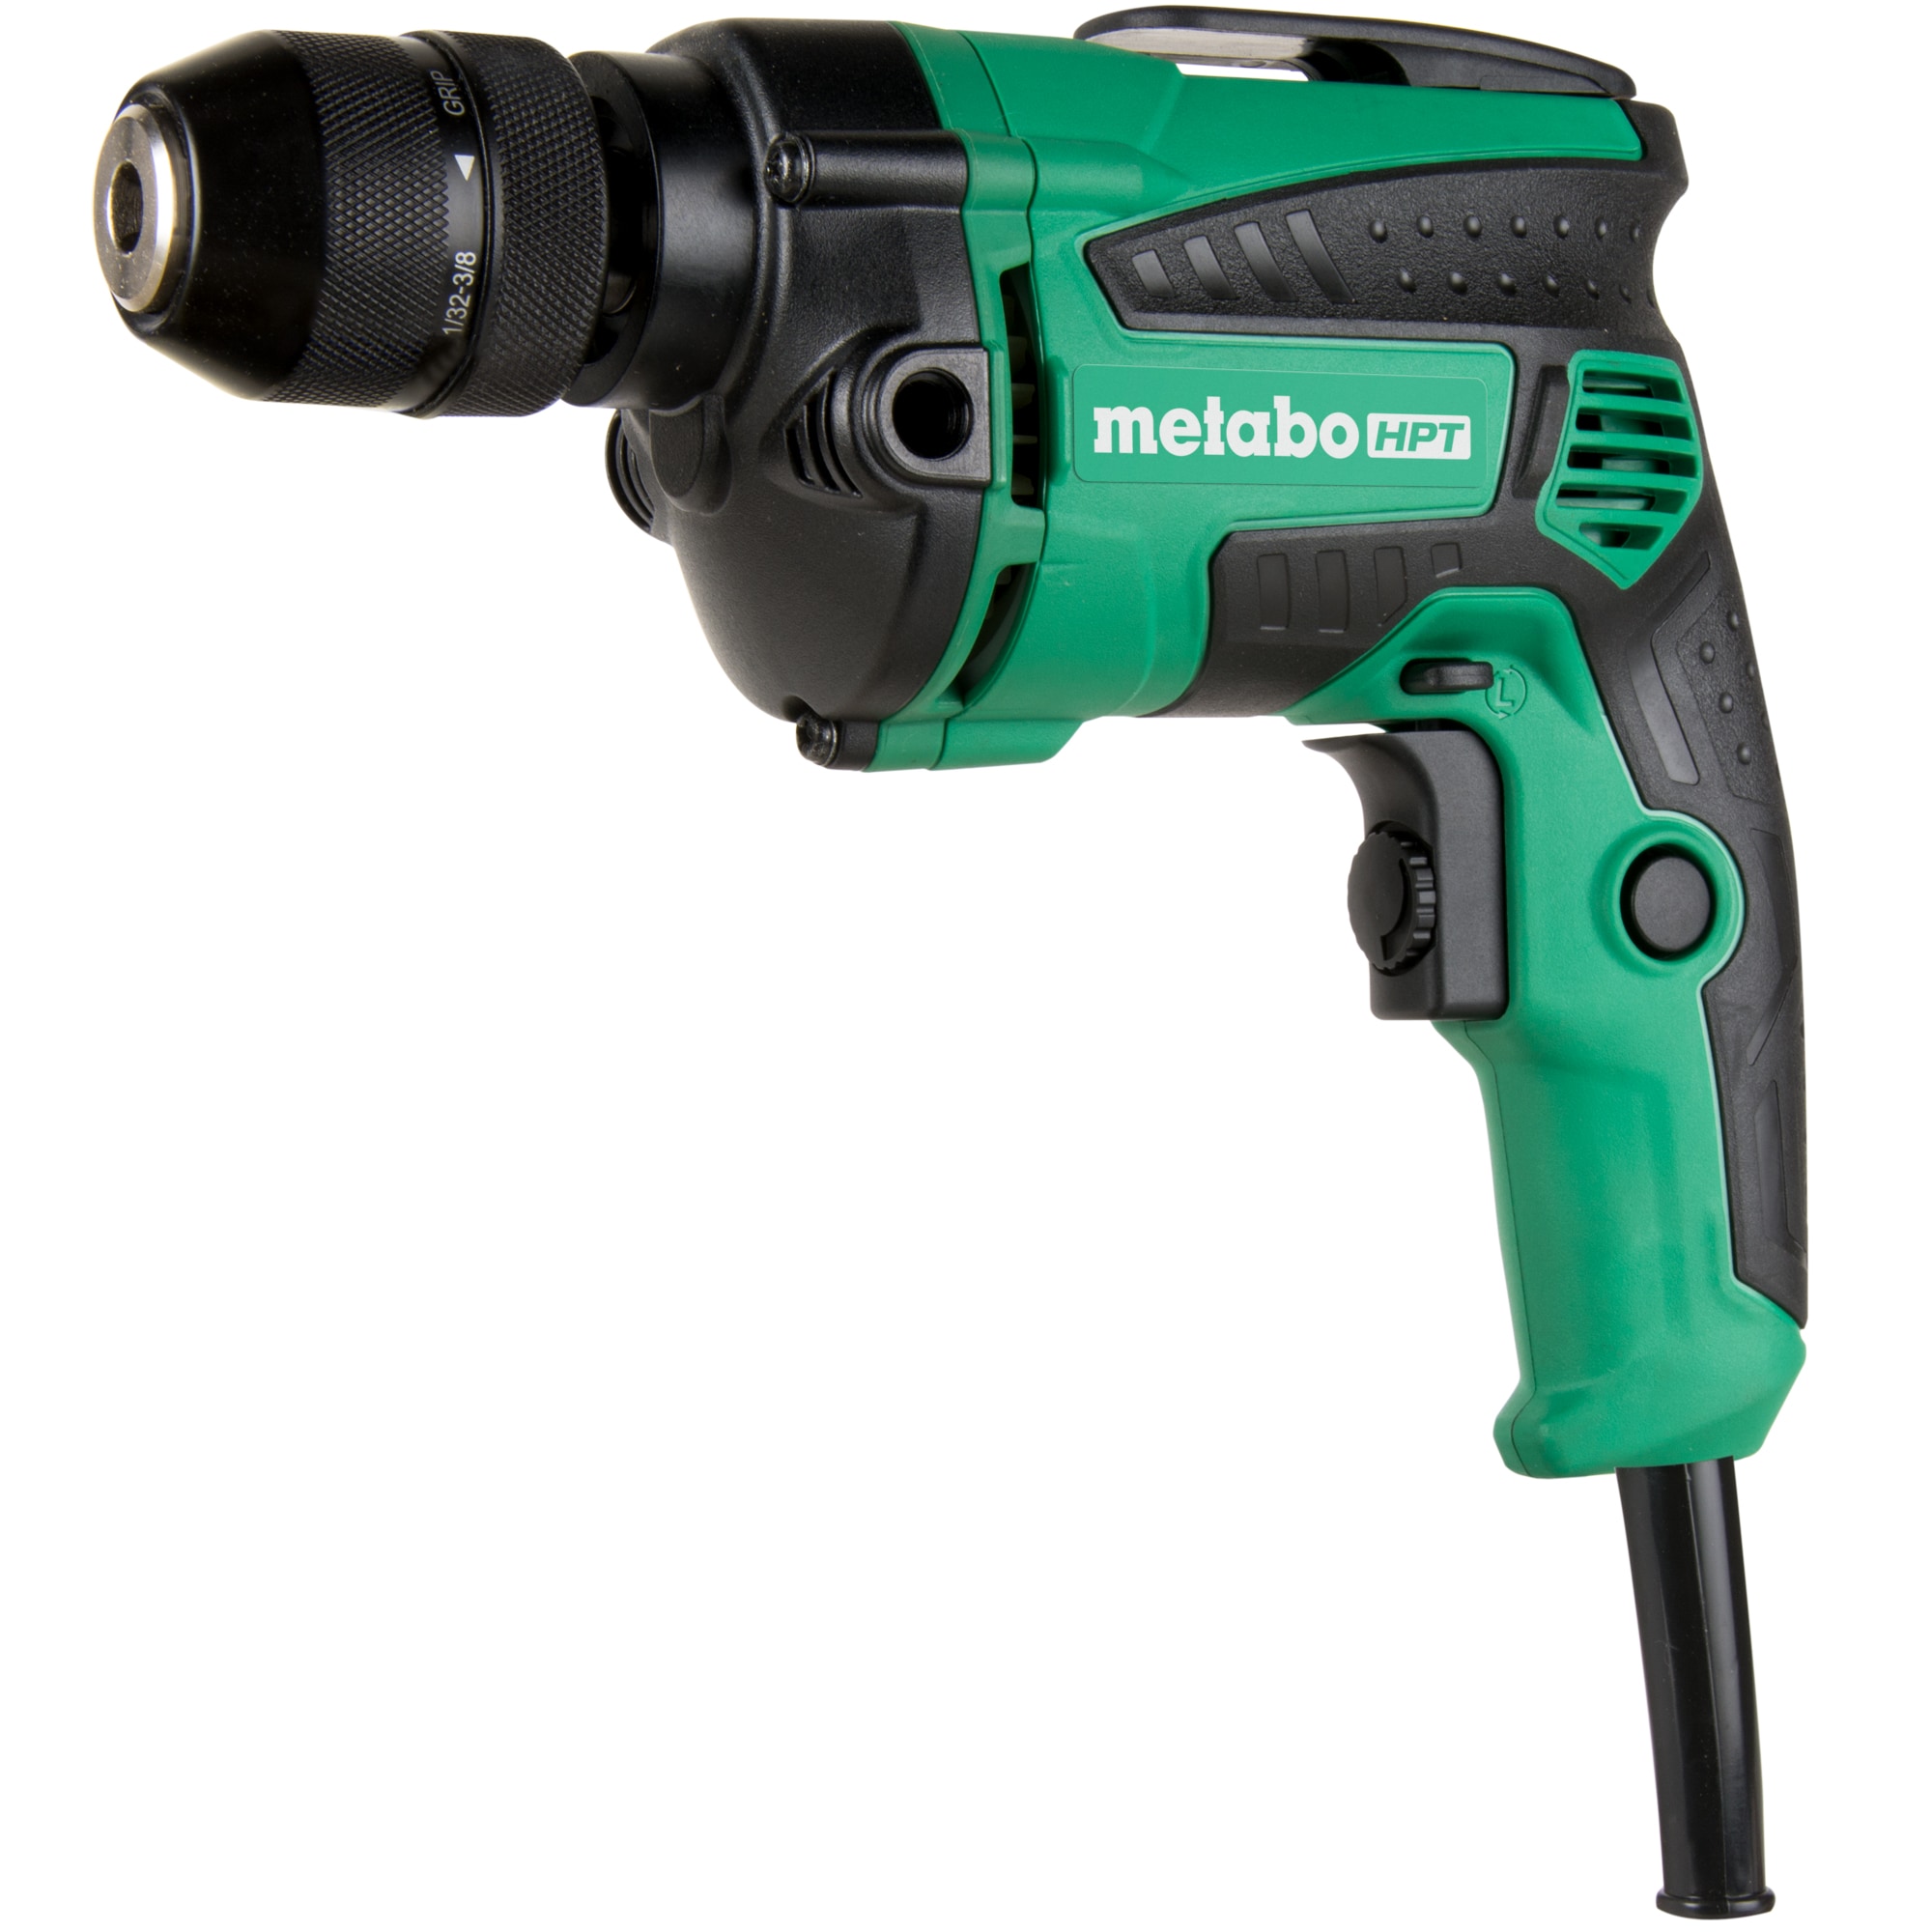 UP TO 2 NEW METABO ELECTRIC DRILL 115 VOLT ARMATURES 31000622 